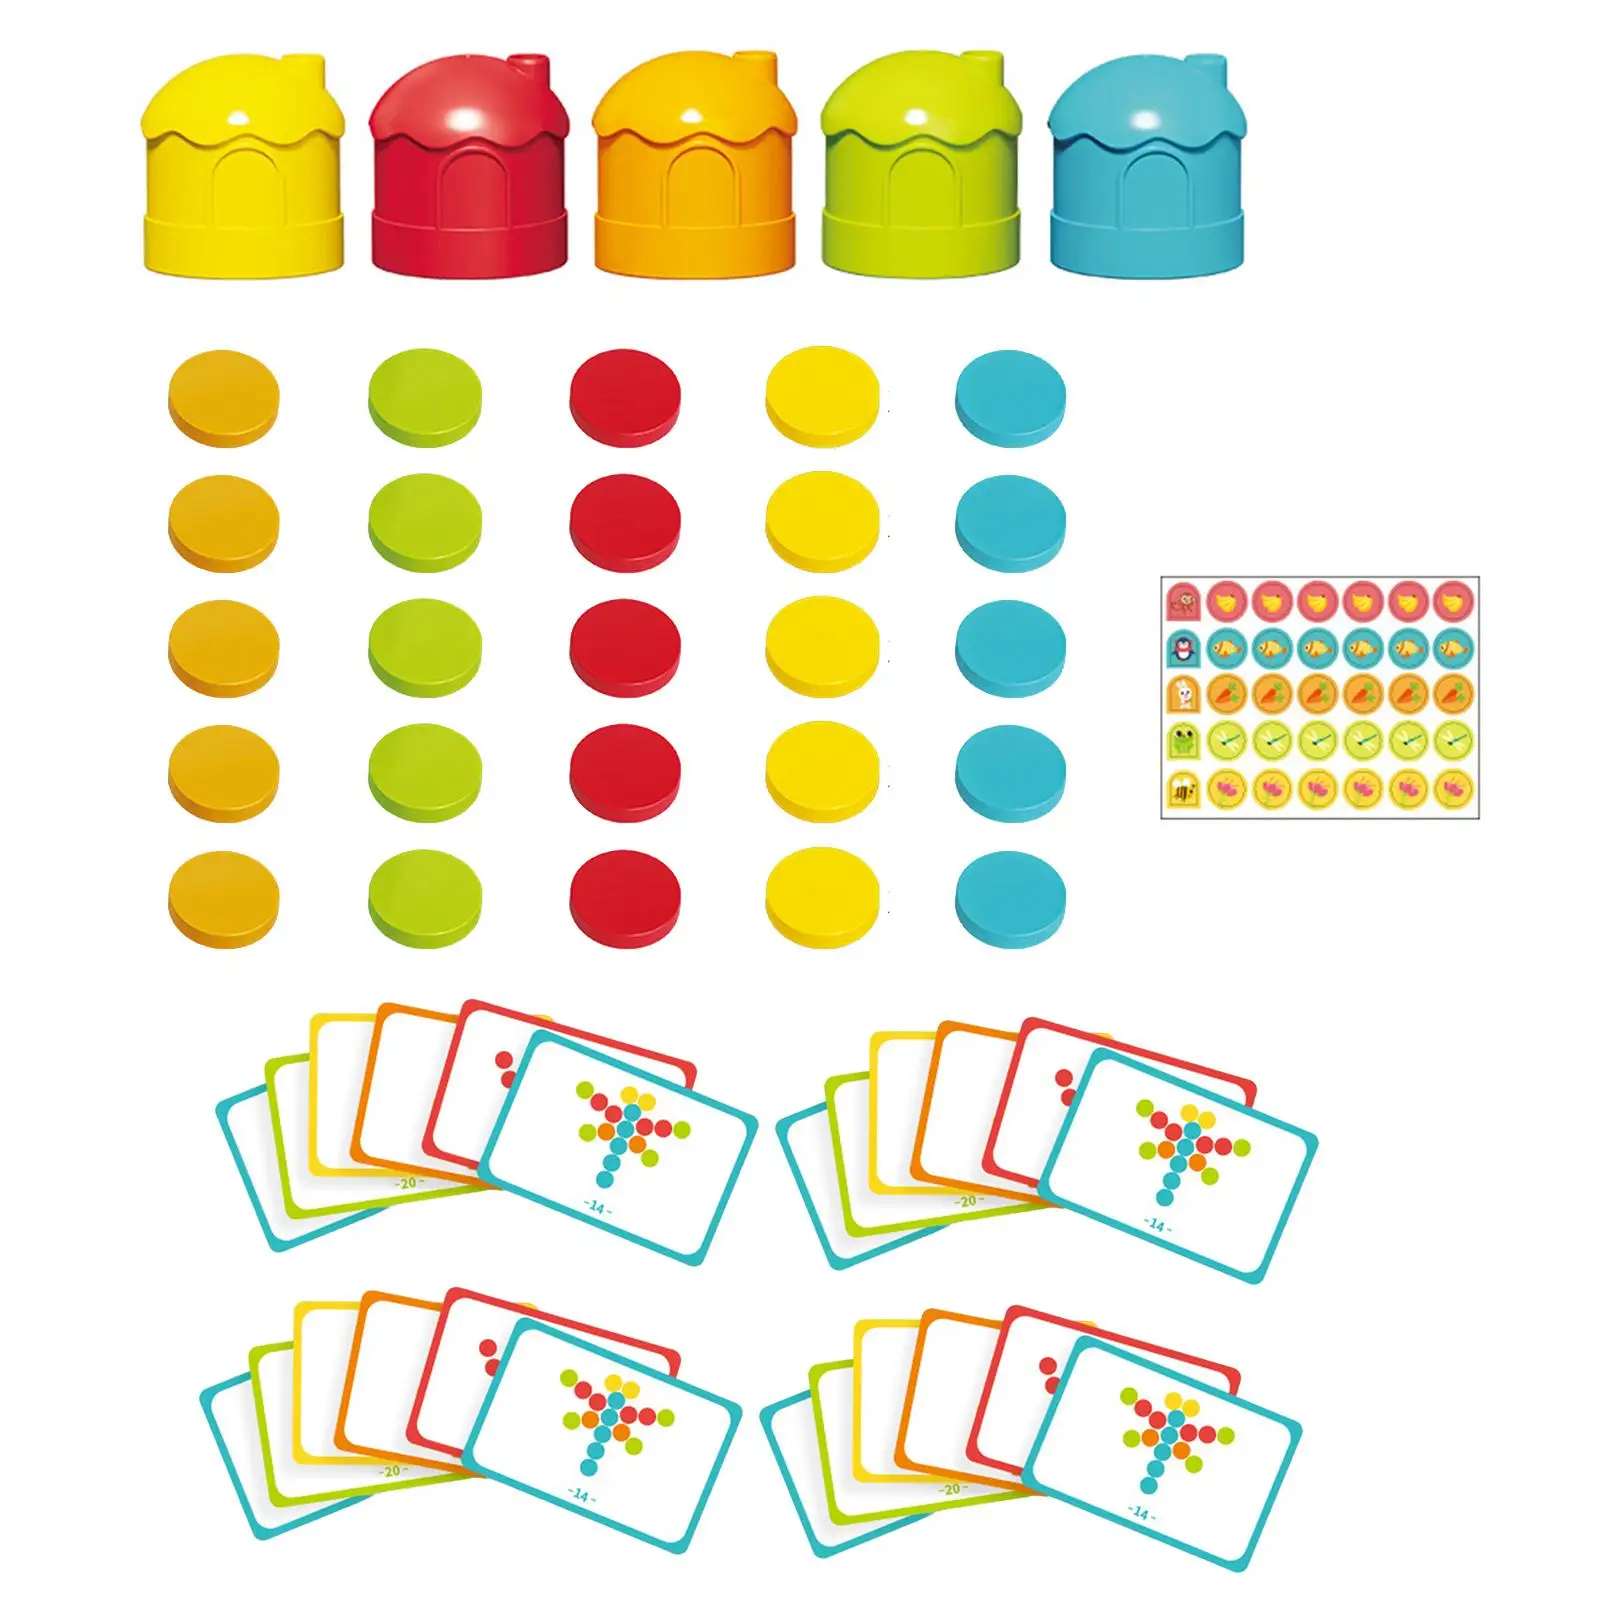 Sorting Cup Birthday Gift Multipurpose Math Teaching Aids Puzzle for Learning Activities Kindergarten Holiday Preschool Toddlers